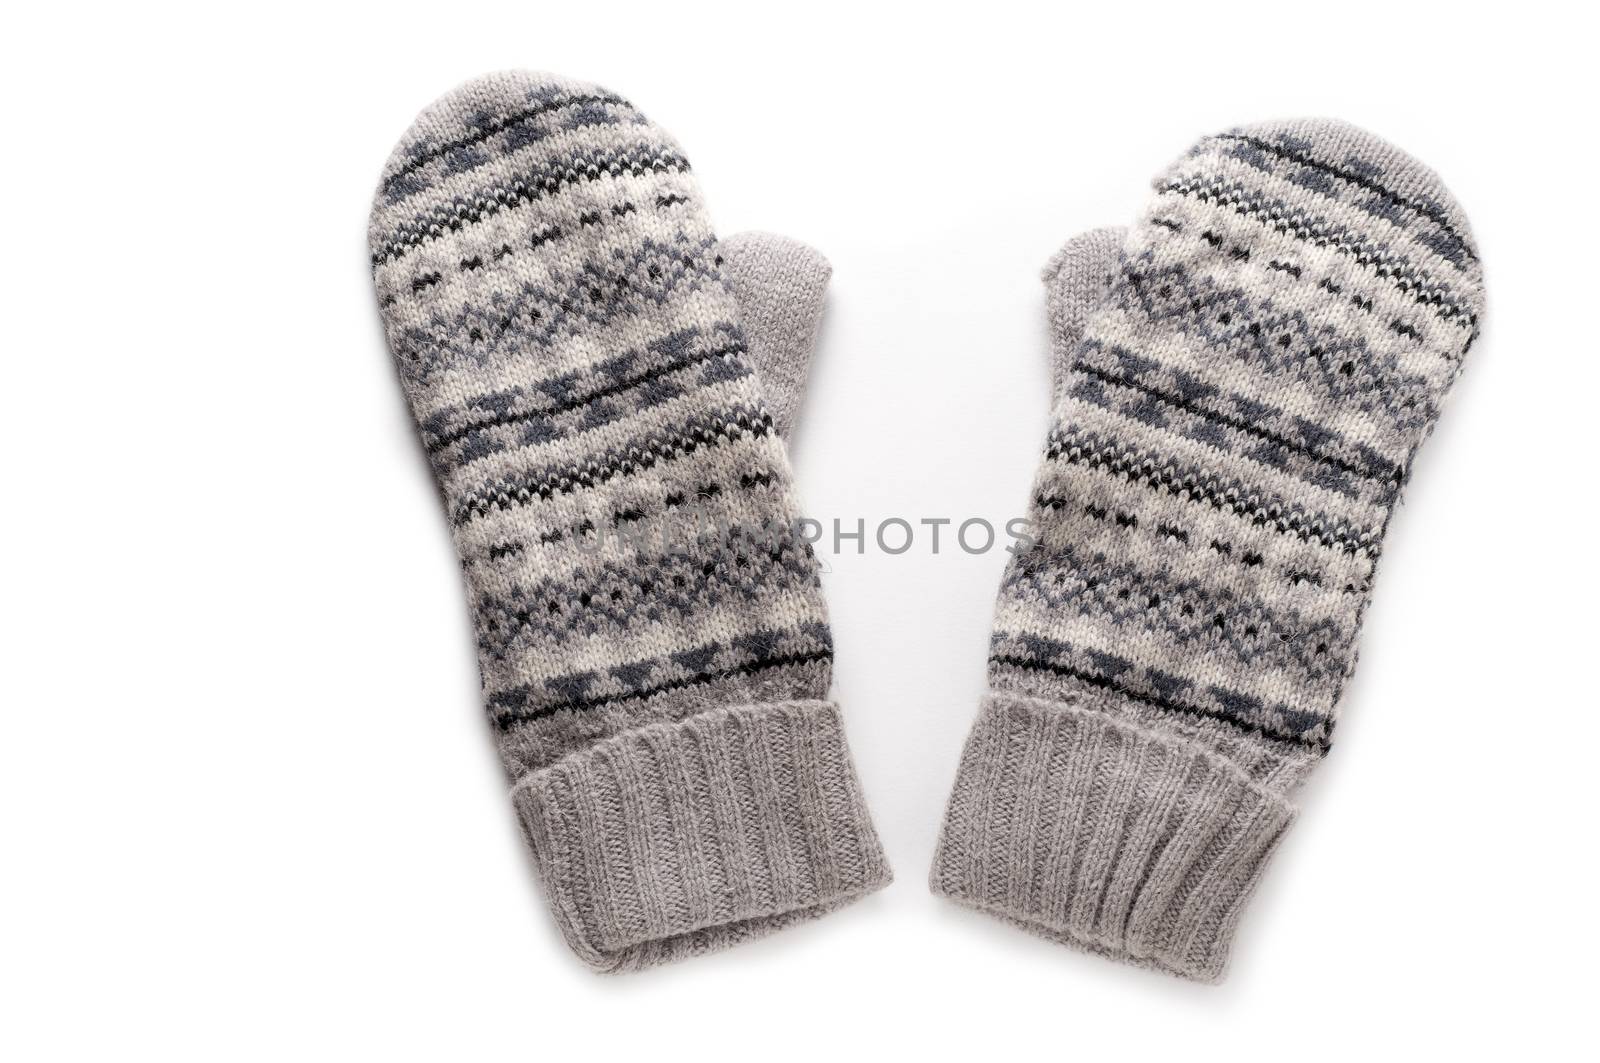 Pair of gray knitted mittens isolated over white